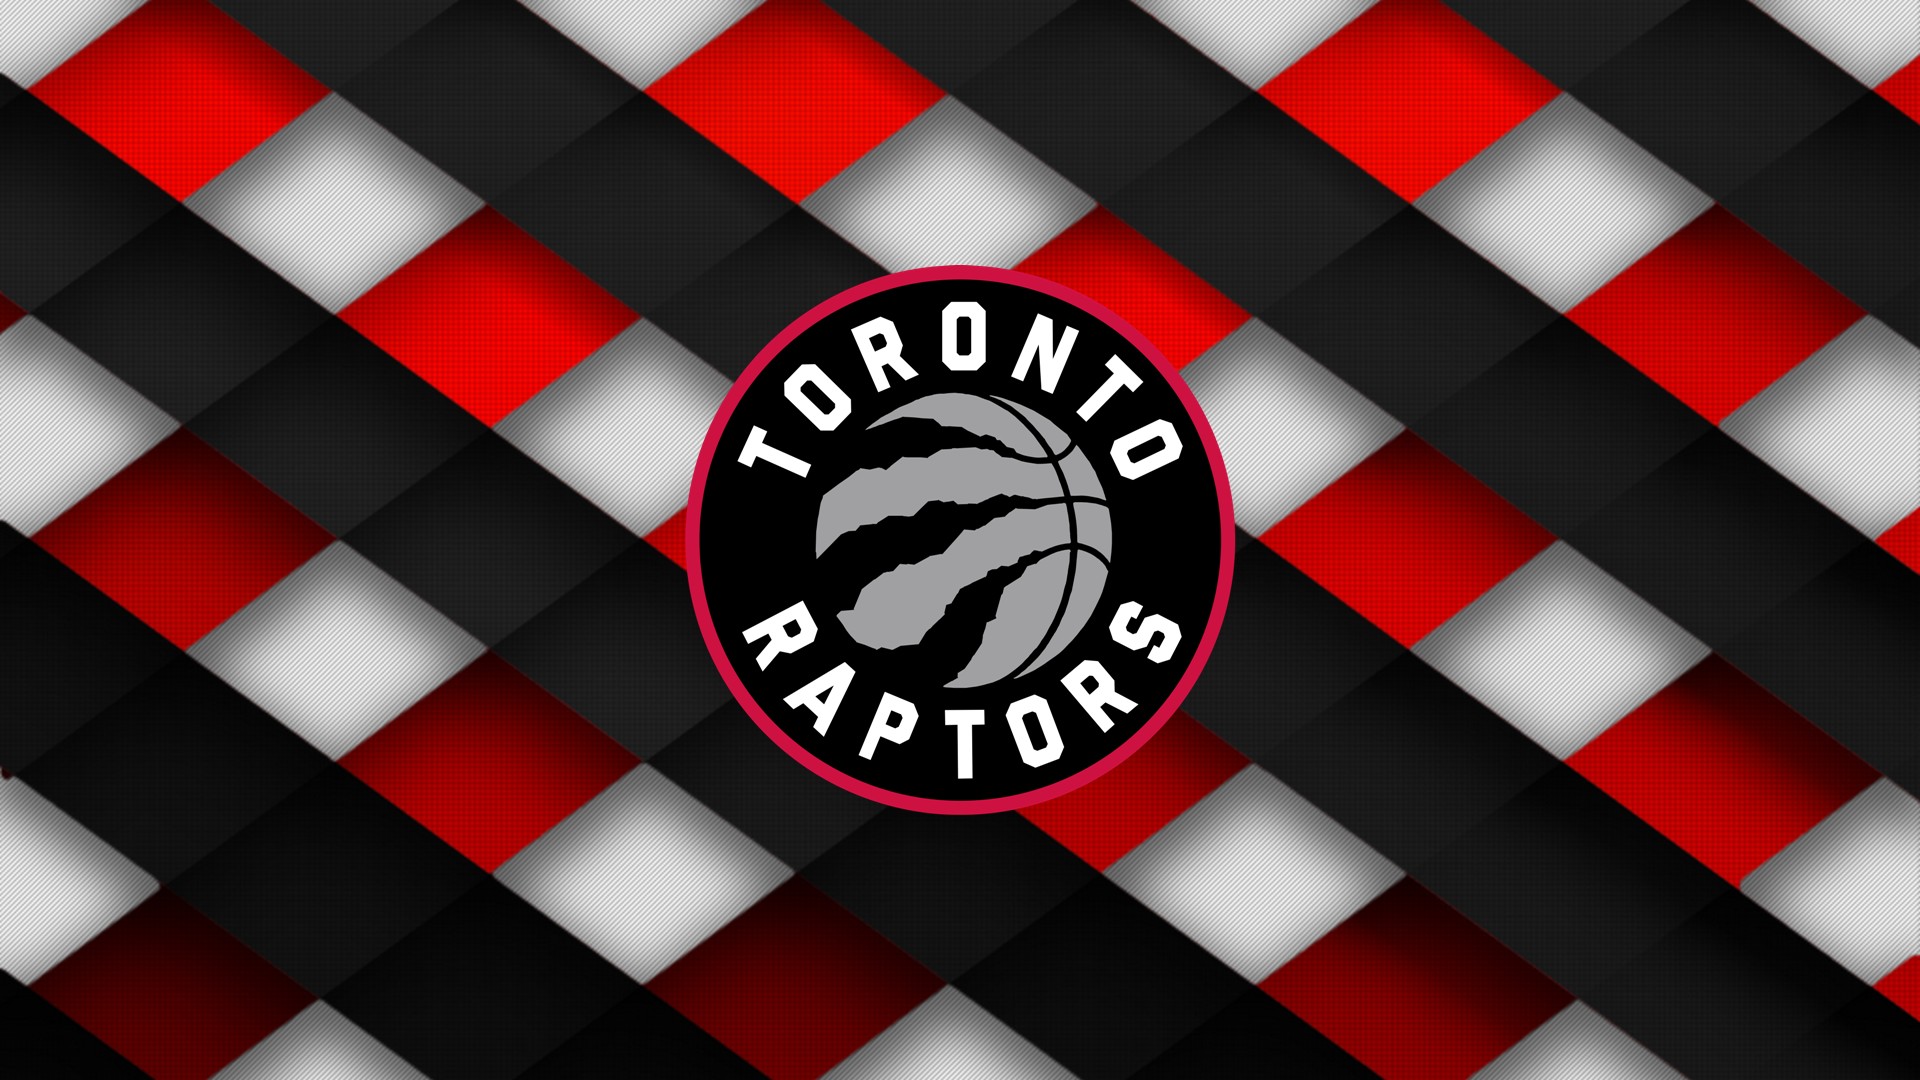 Raptors Basketball Hd Wallpapers With Image Dimensions - Black White An Red - HD Wallpaper 